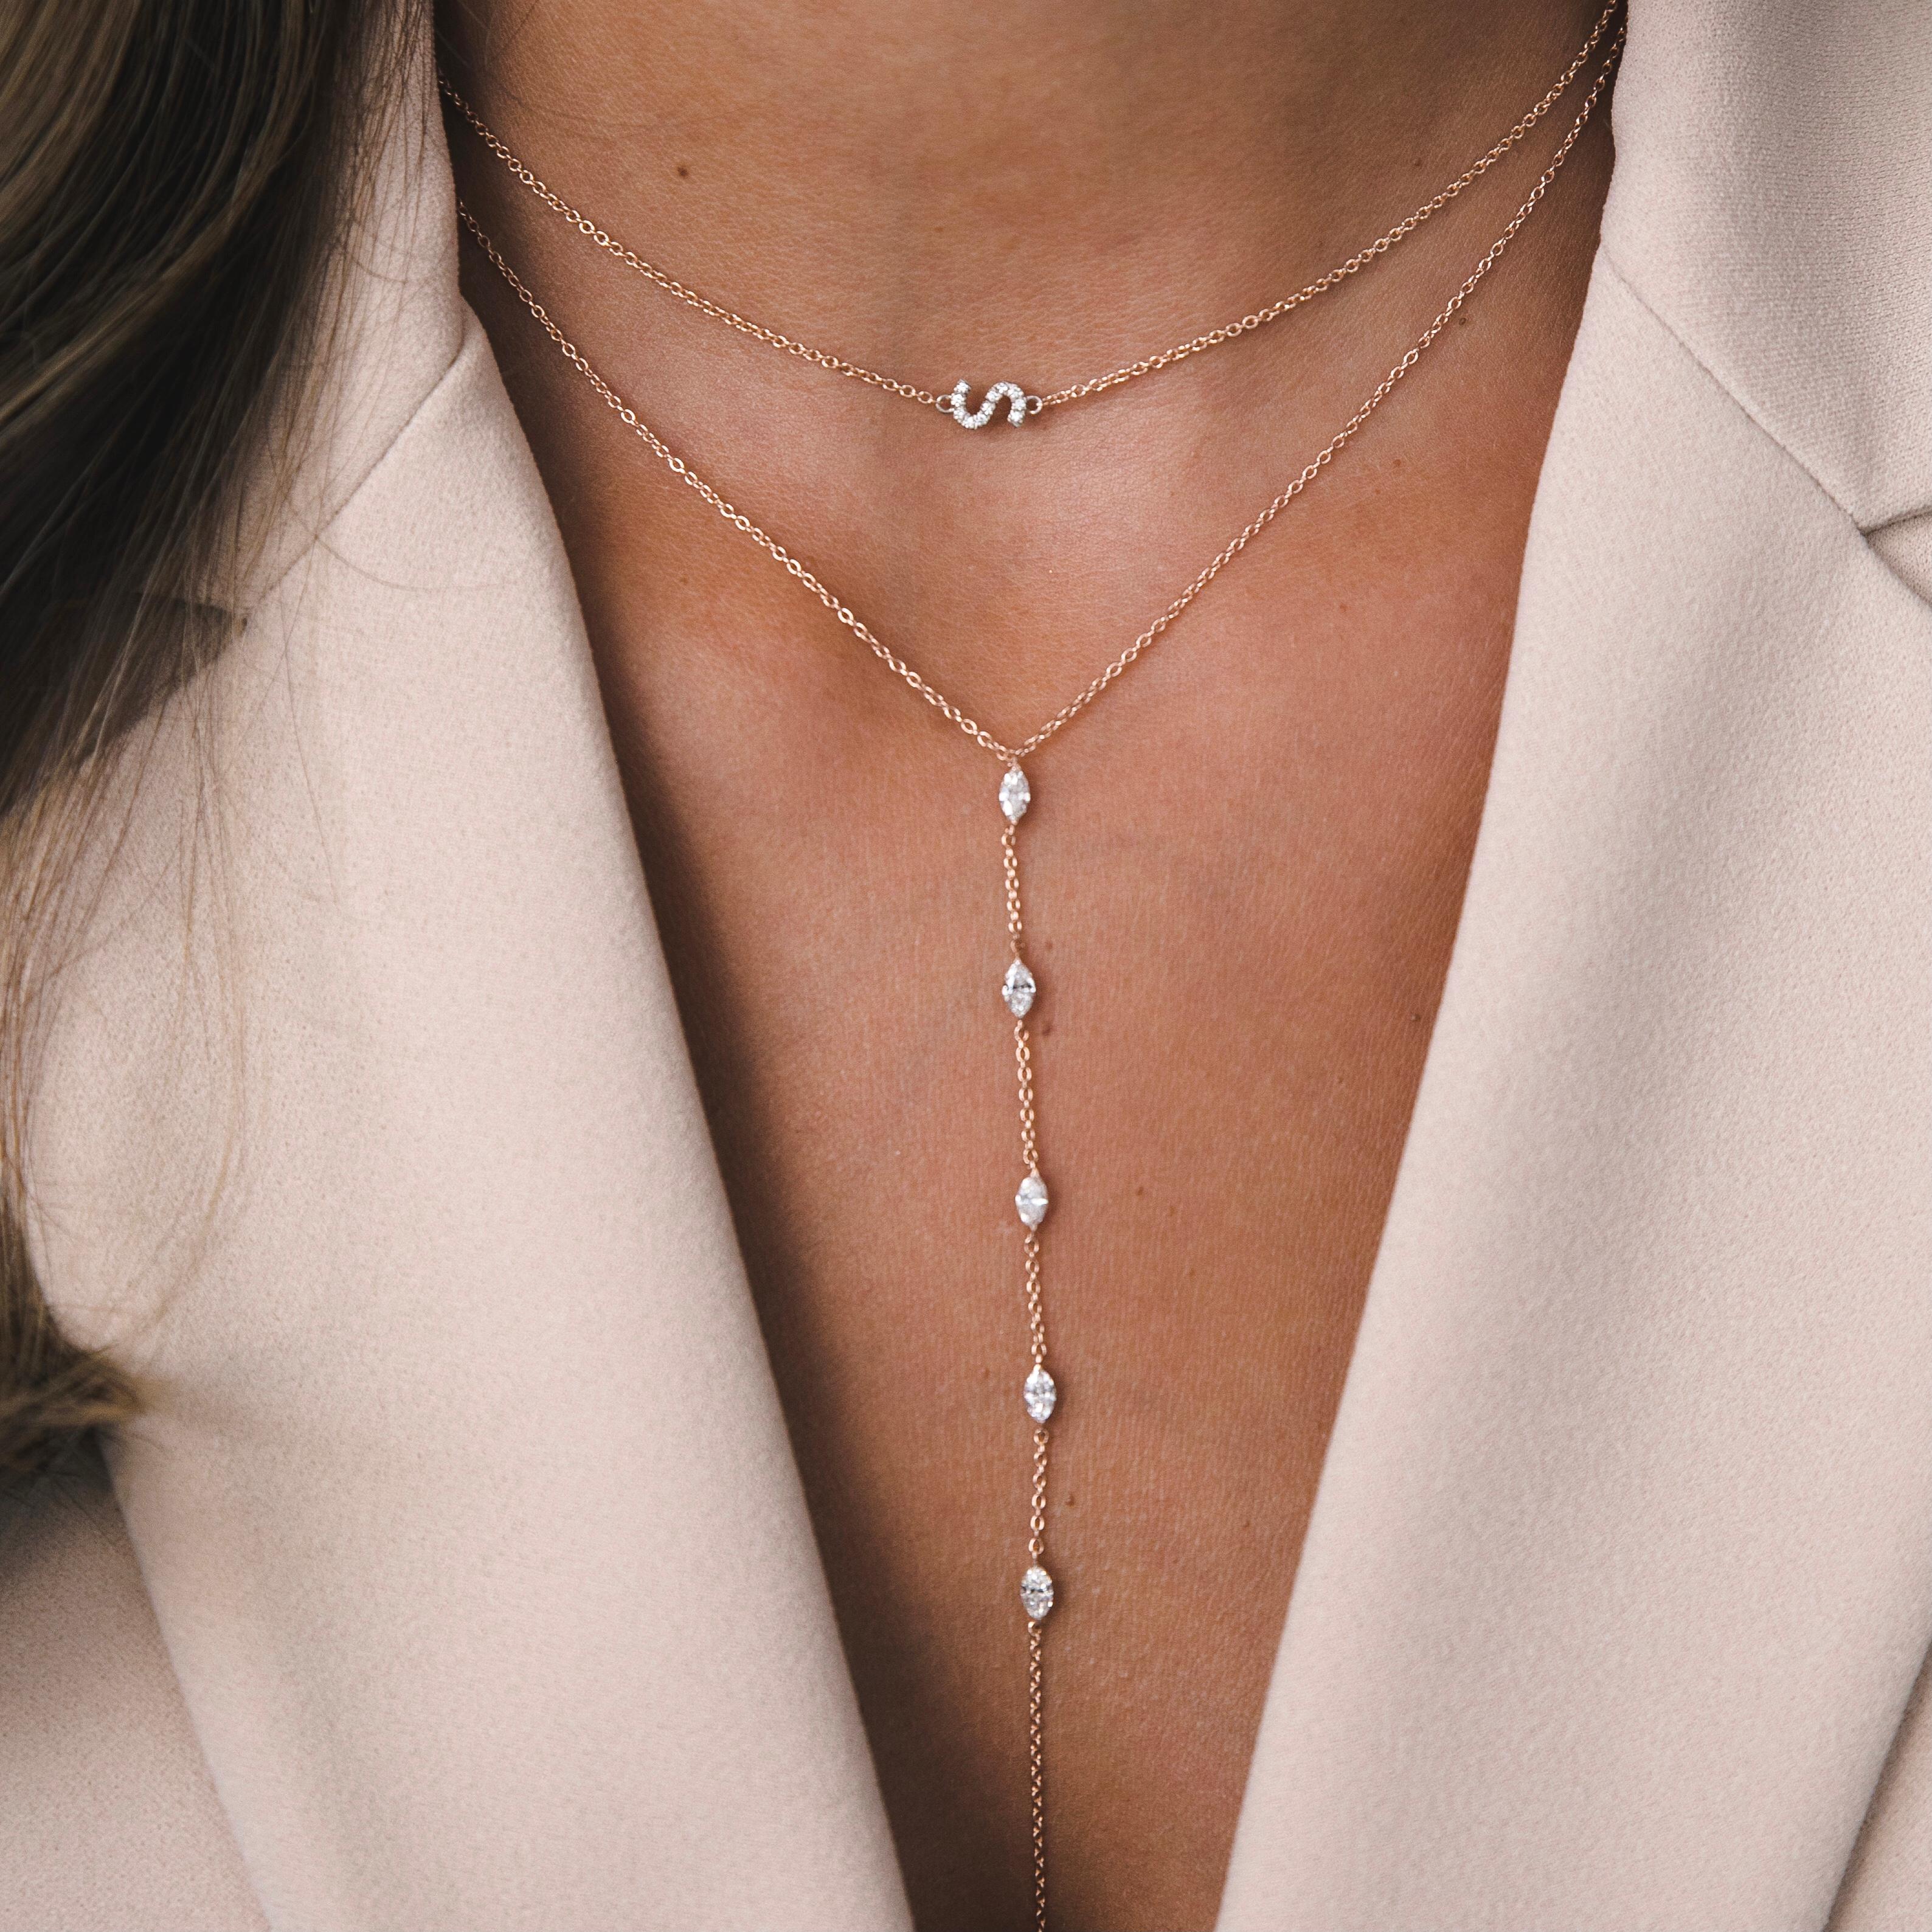 Personalised Diamond Letter Initial Necklace in 14k Rose Gold - Shlomit Rogel

Make it personal!
Beautifully handcrafted in 14k rose gold, this necklace features an asymmetrical initial of your choice made from 14K white gold and embellished with